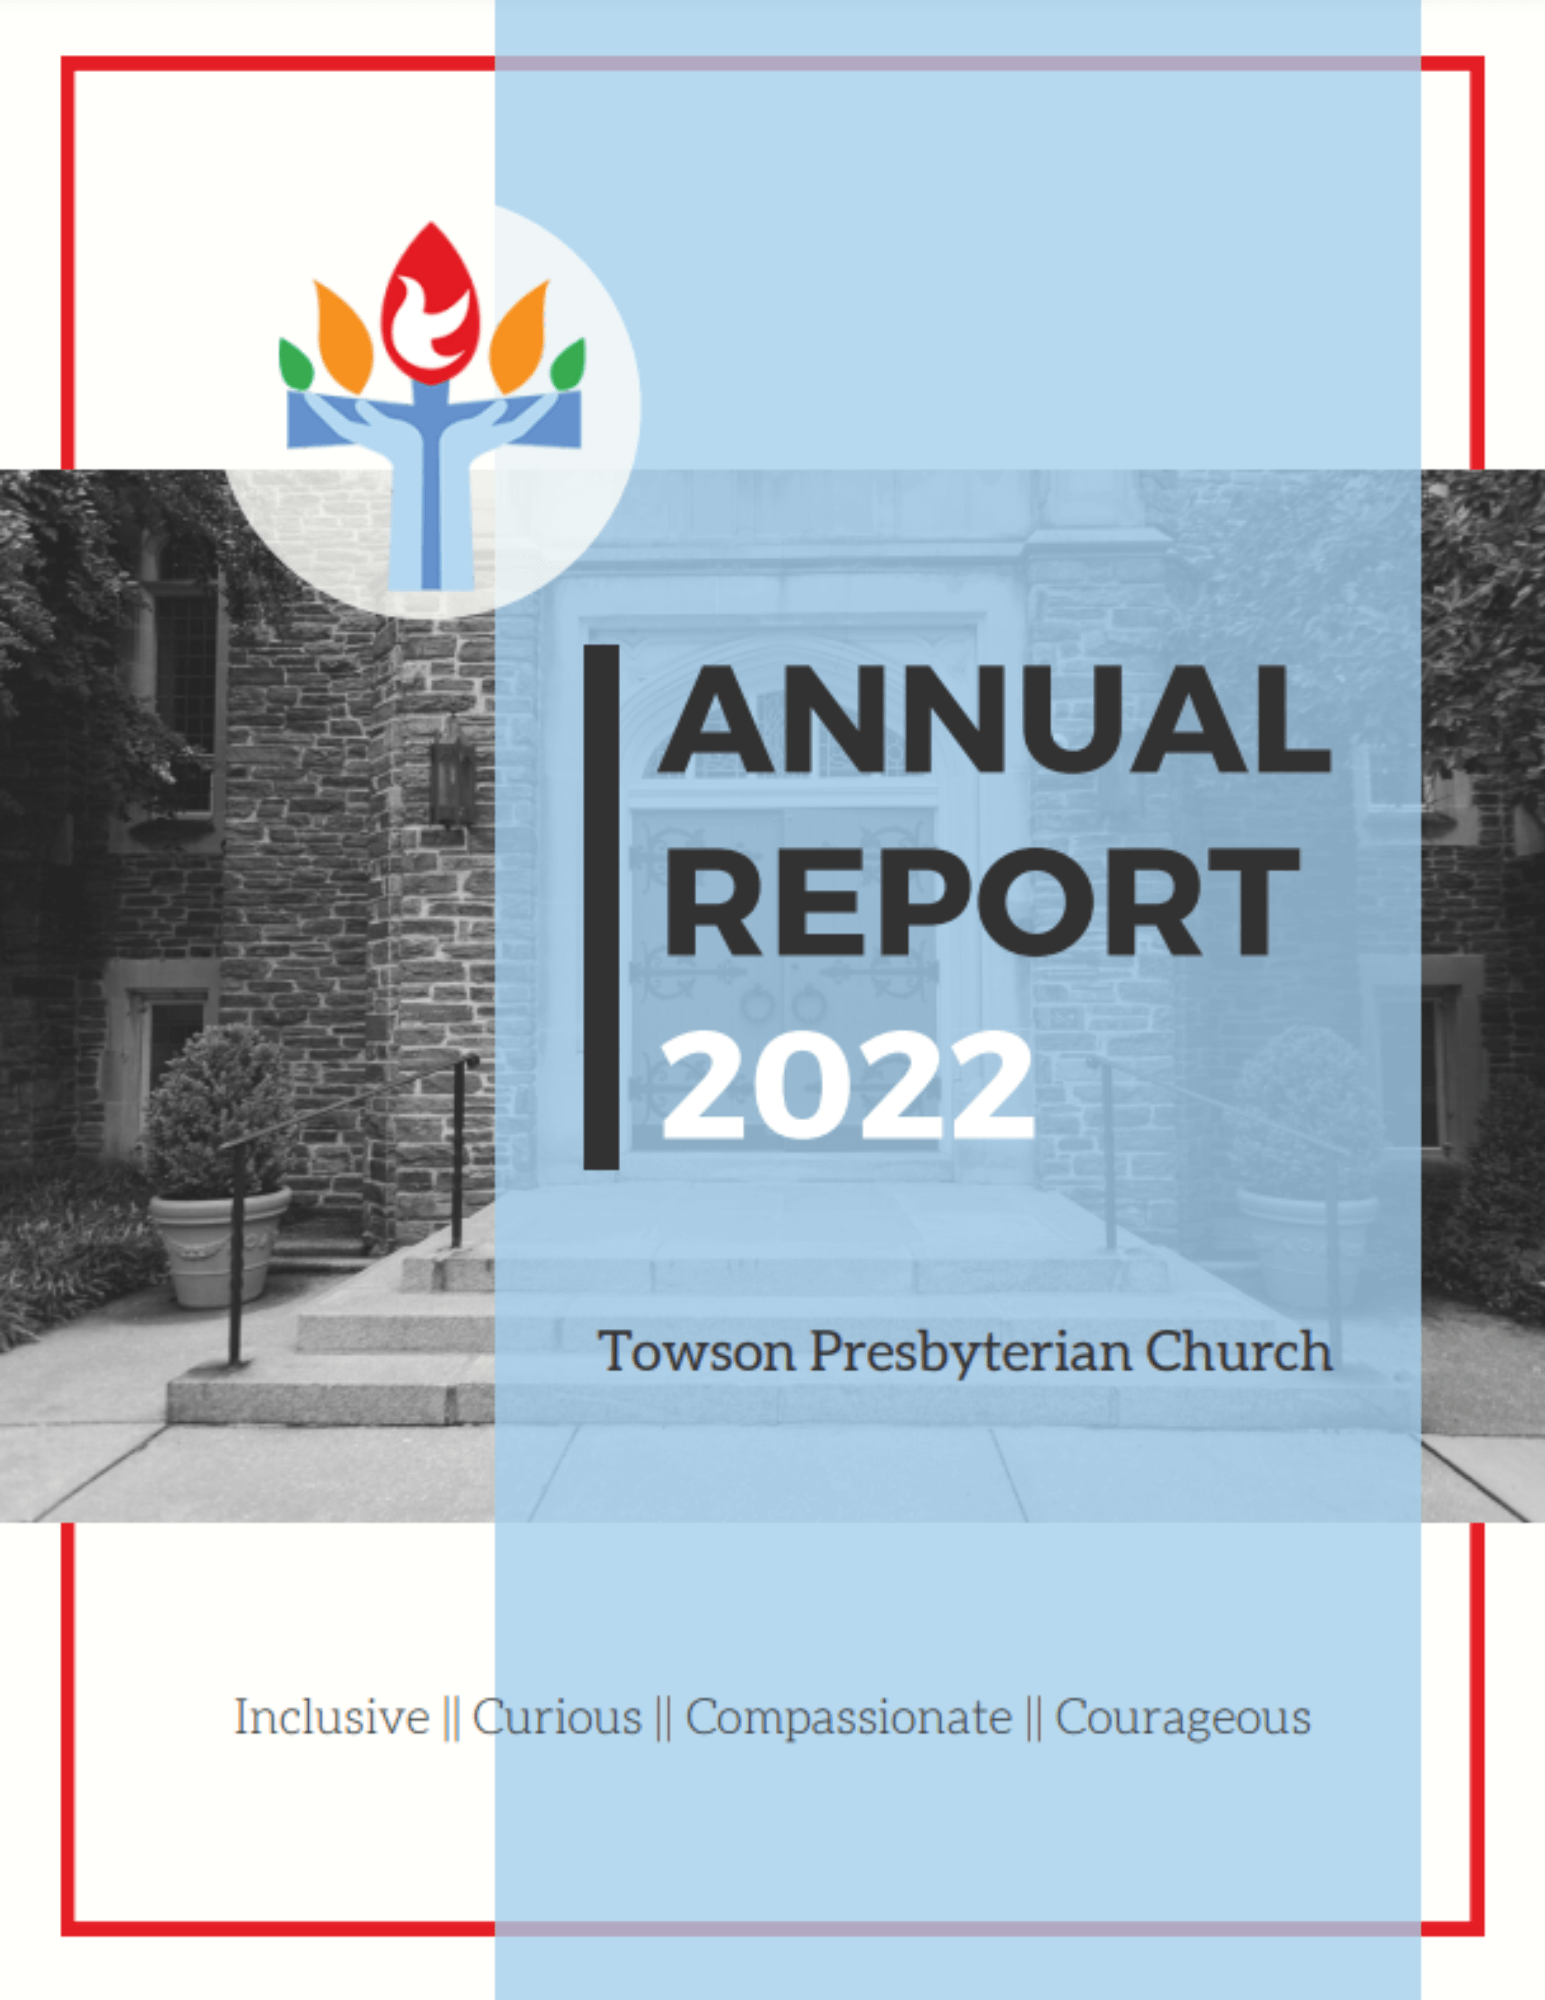 Infographic of the Towson Presbyterian Church 2022 Annual Report.